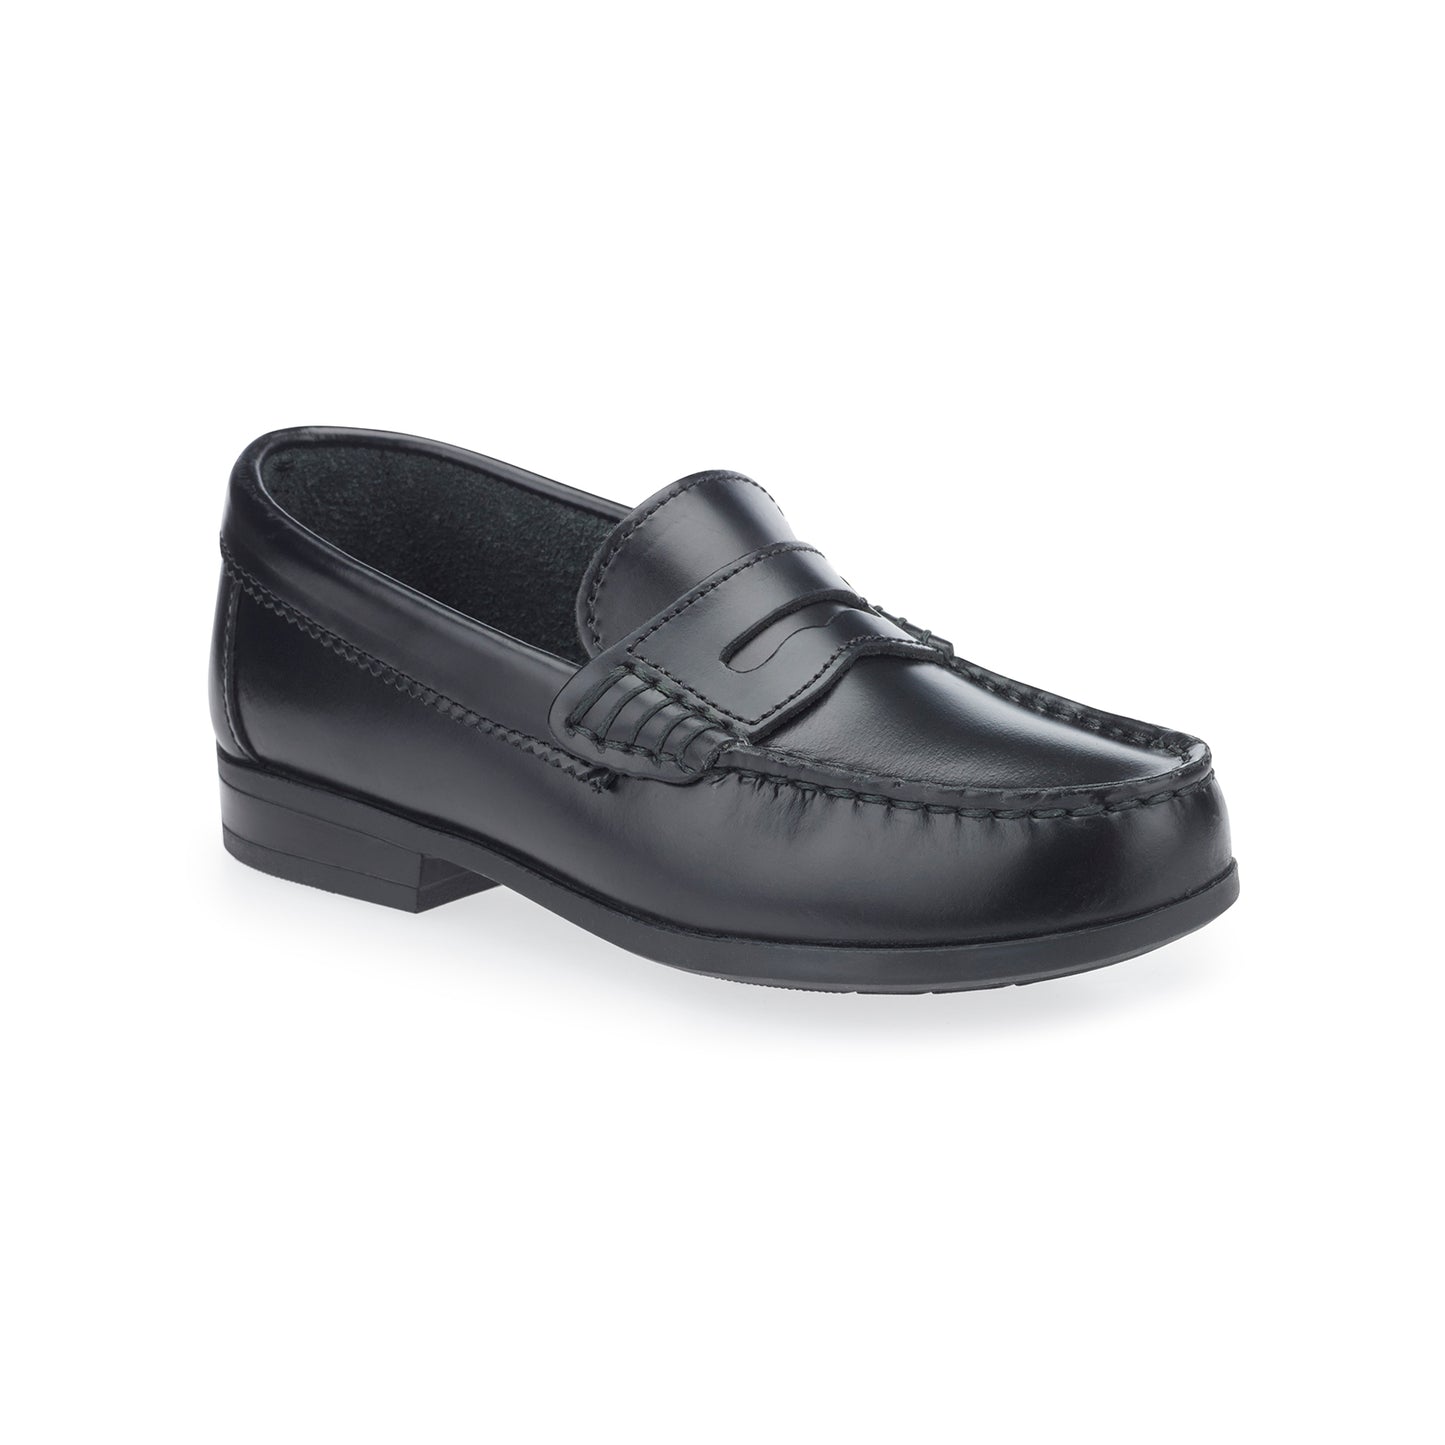 Start-Rite Penny 2 Loafer School Shoes